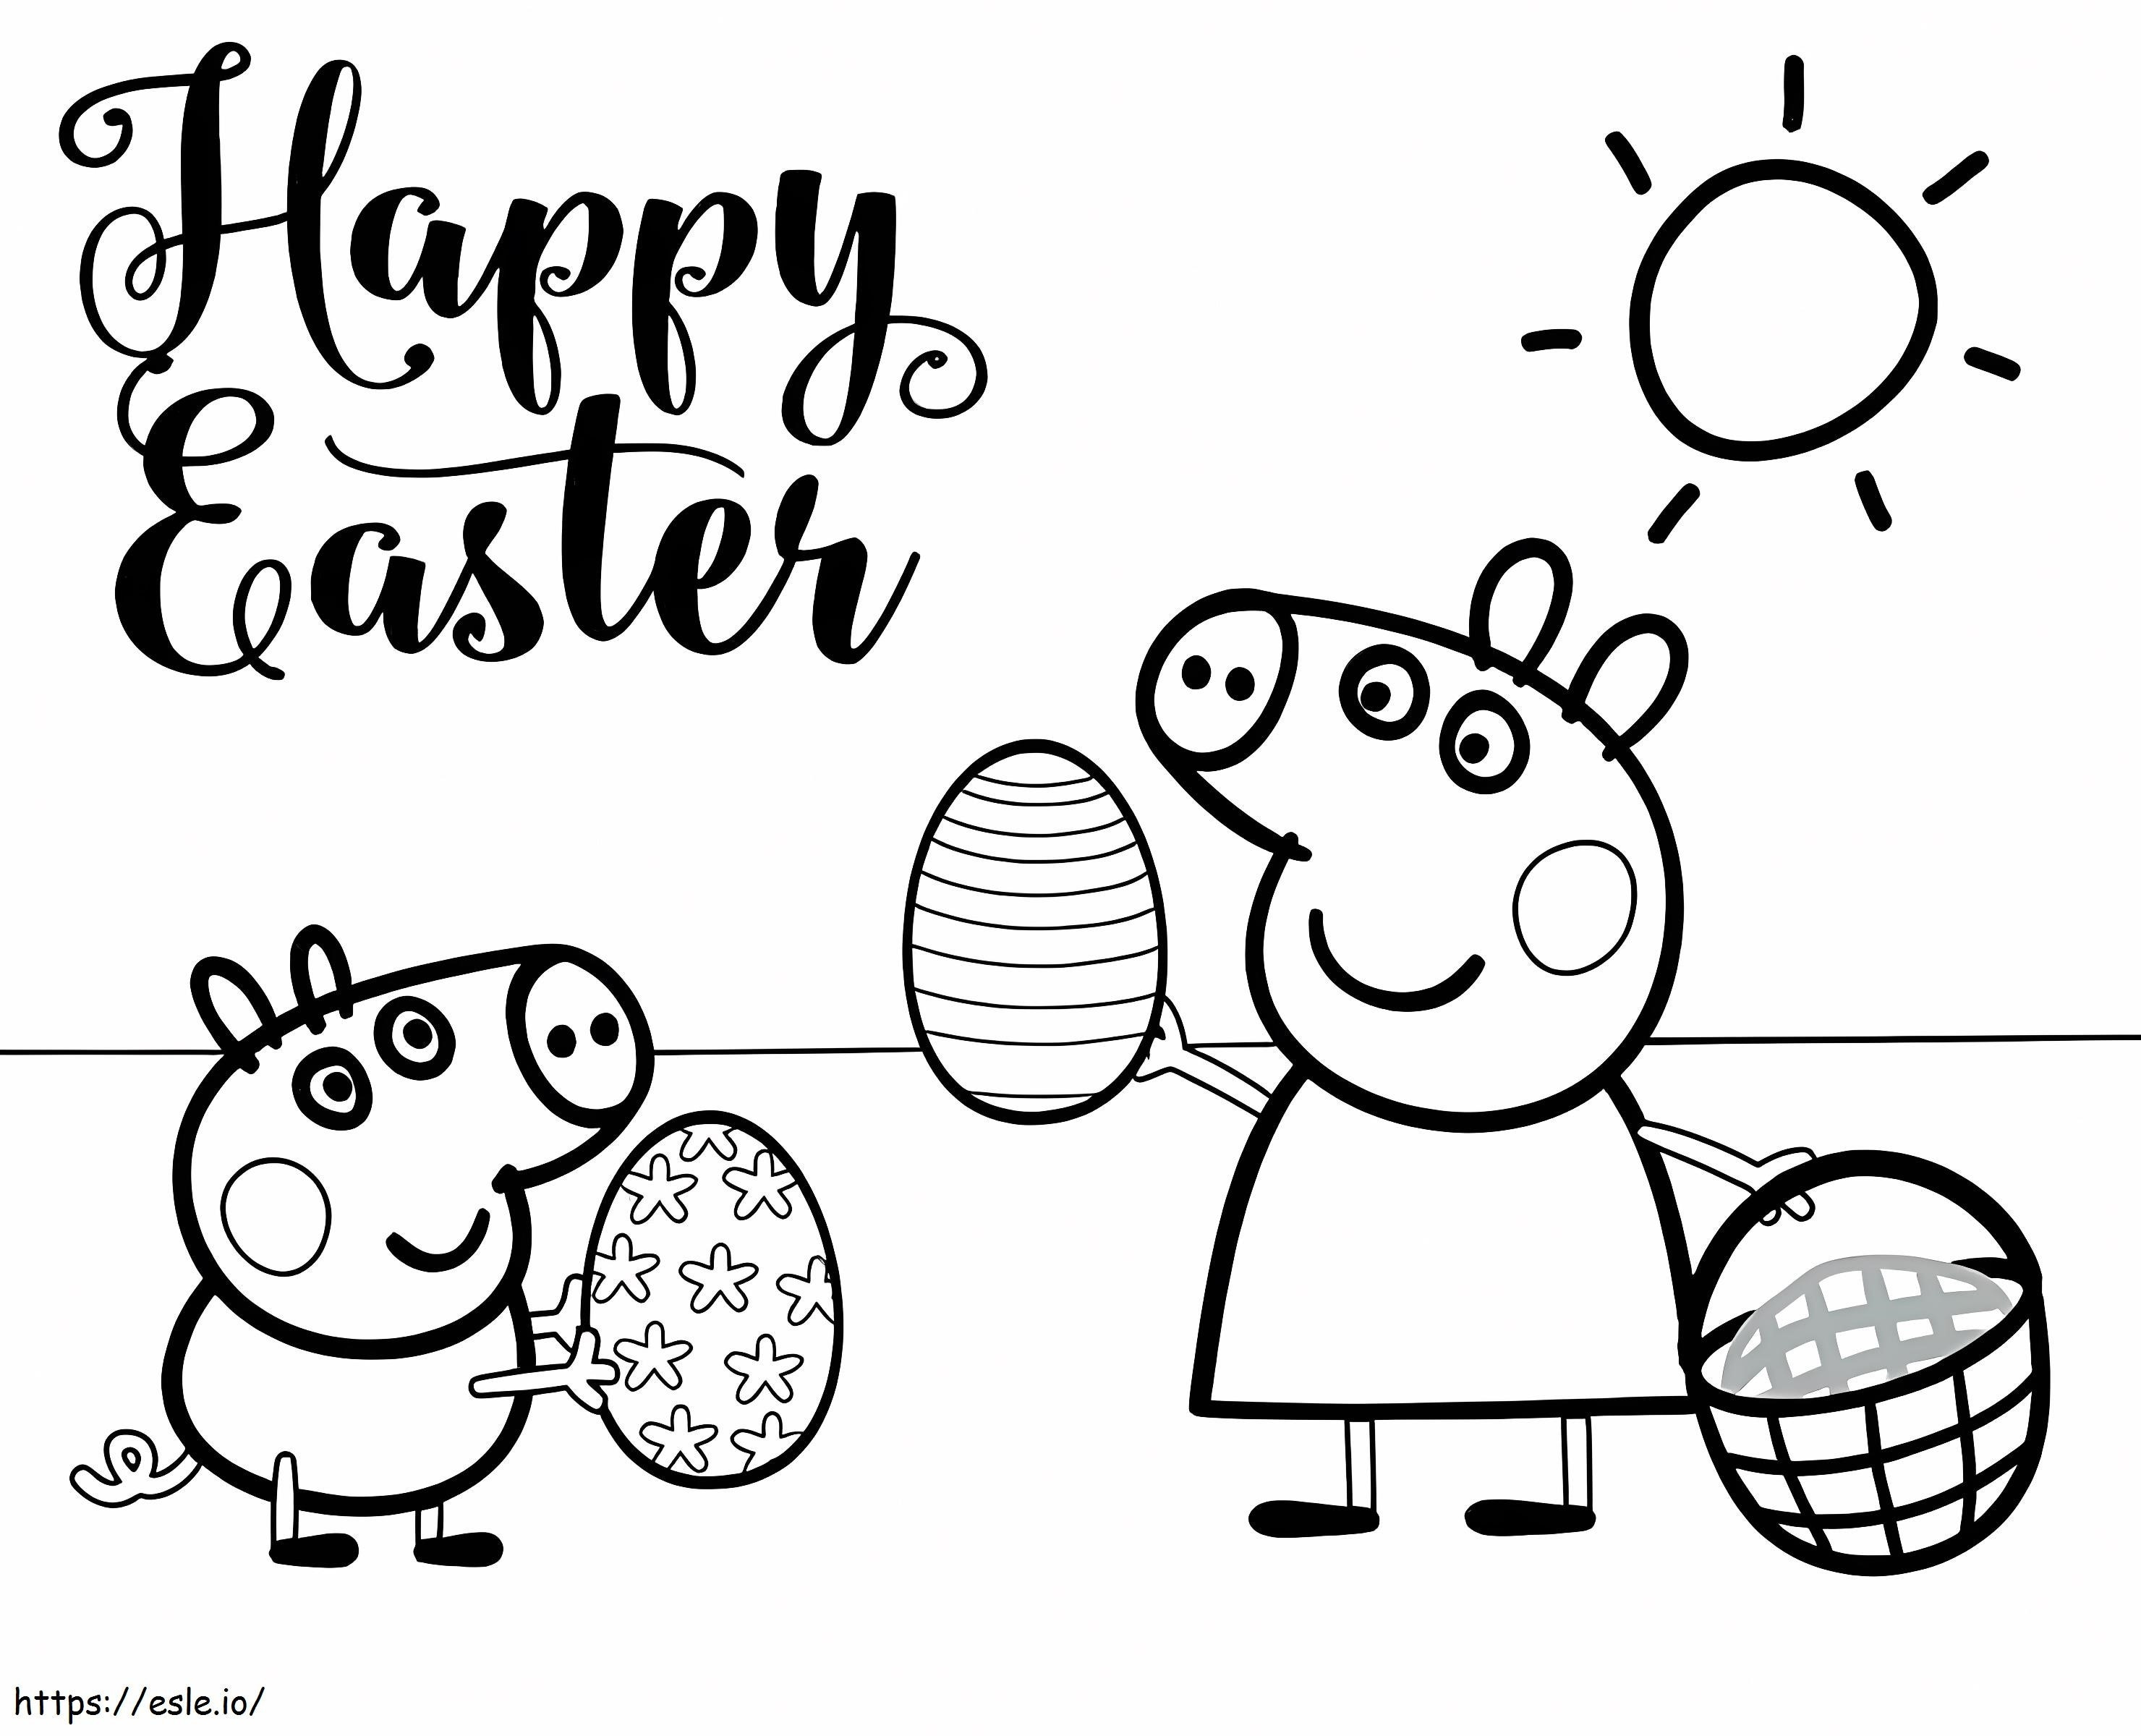 Peppa Pig And Easter Eggs coloring page